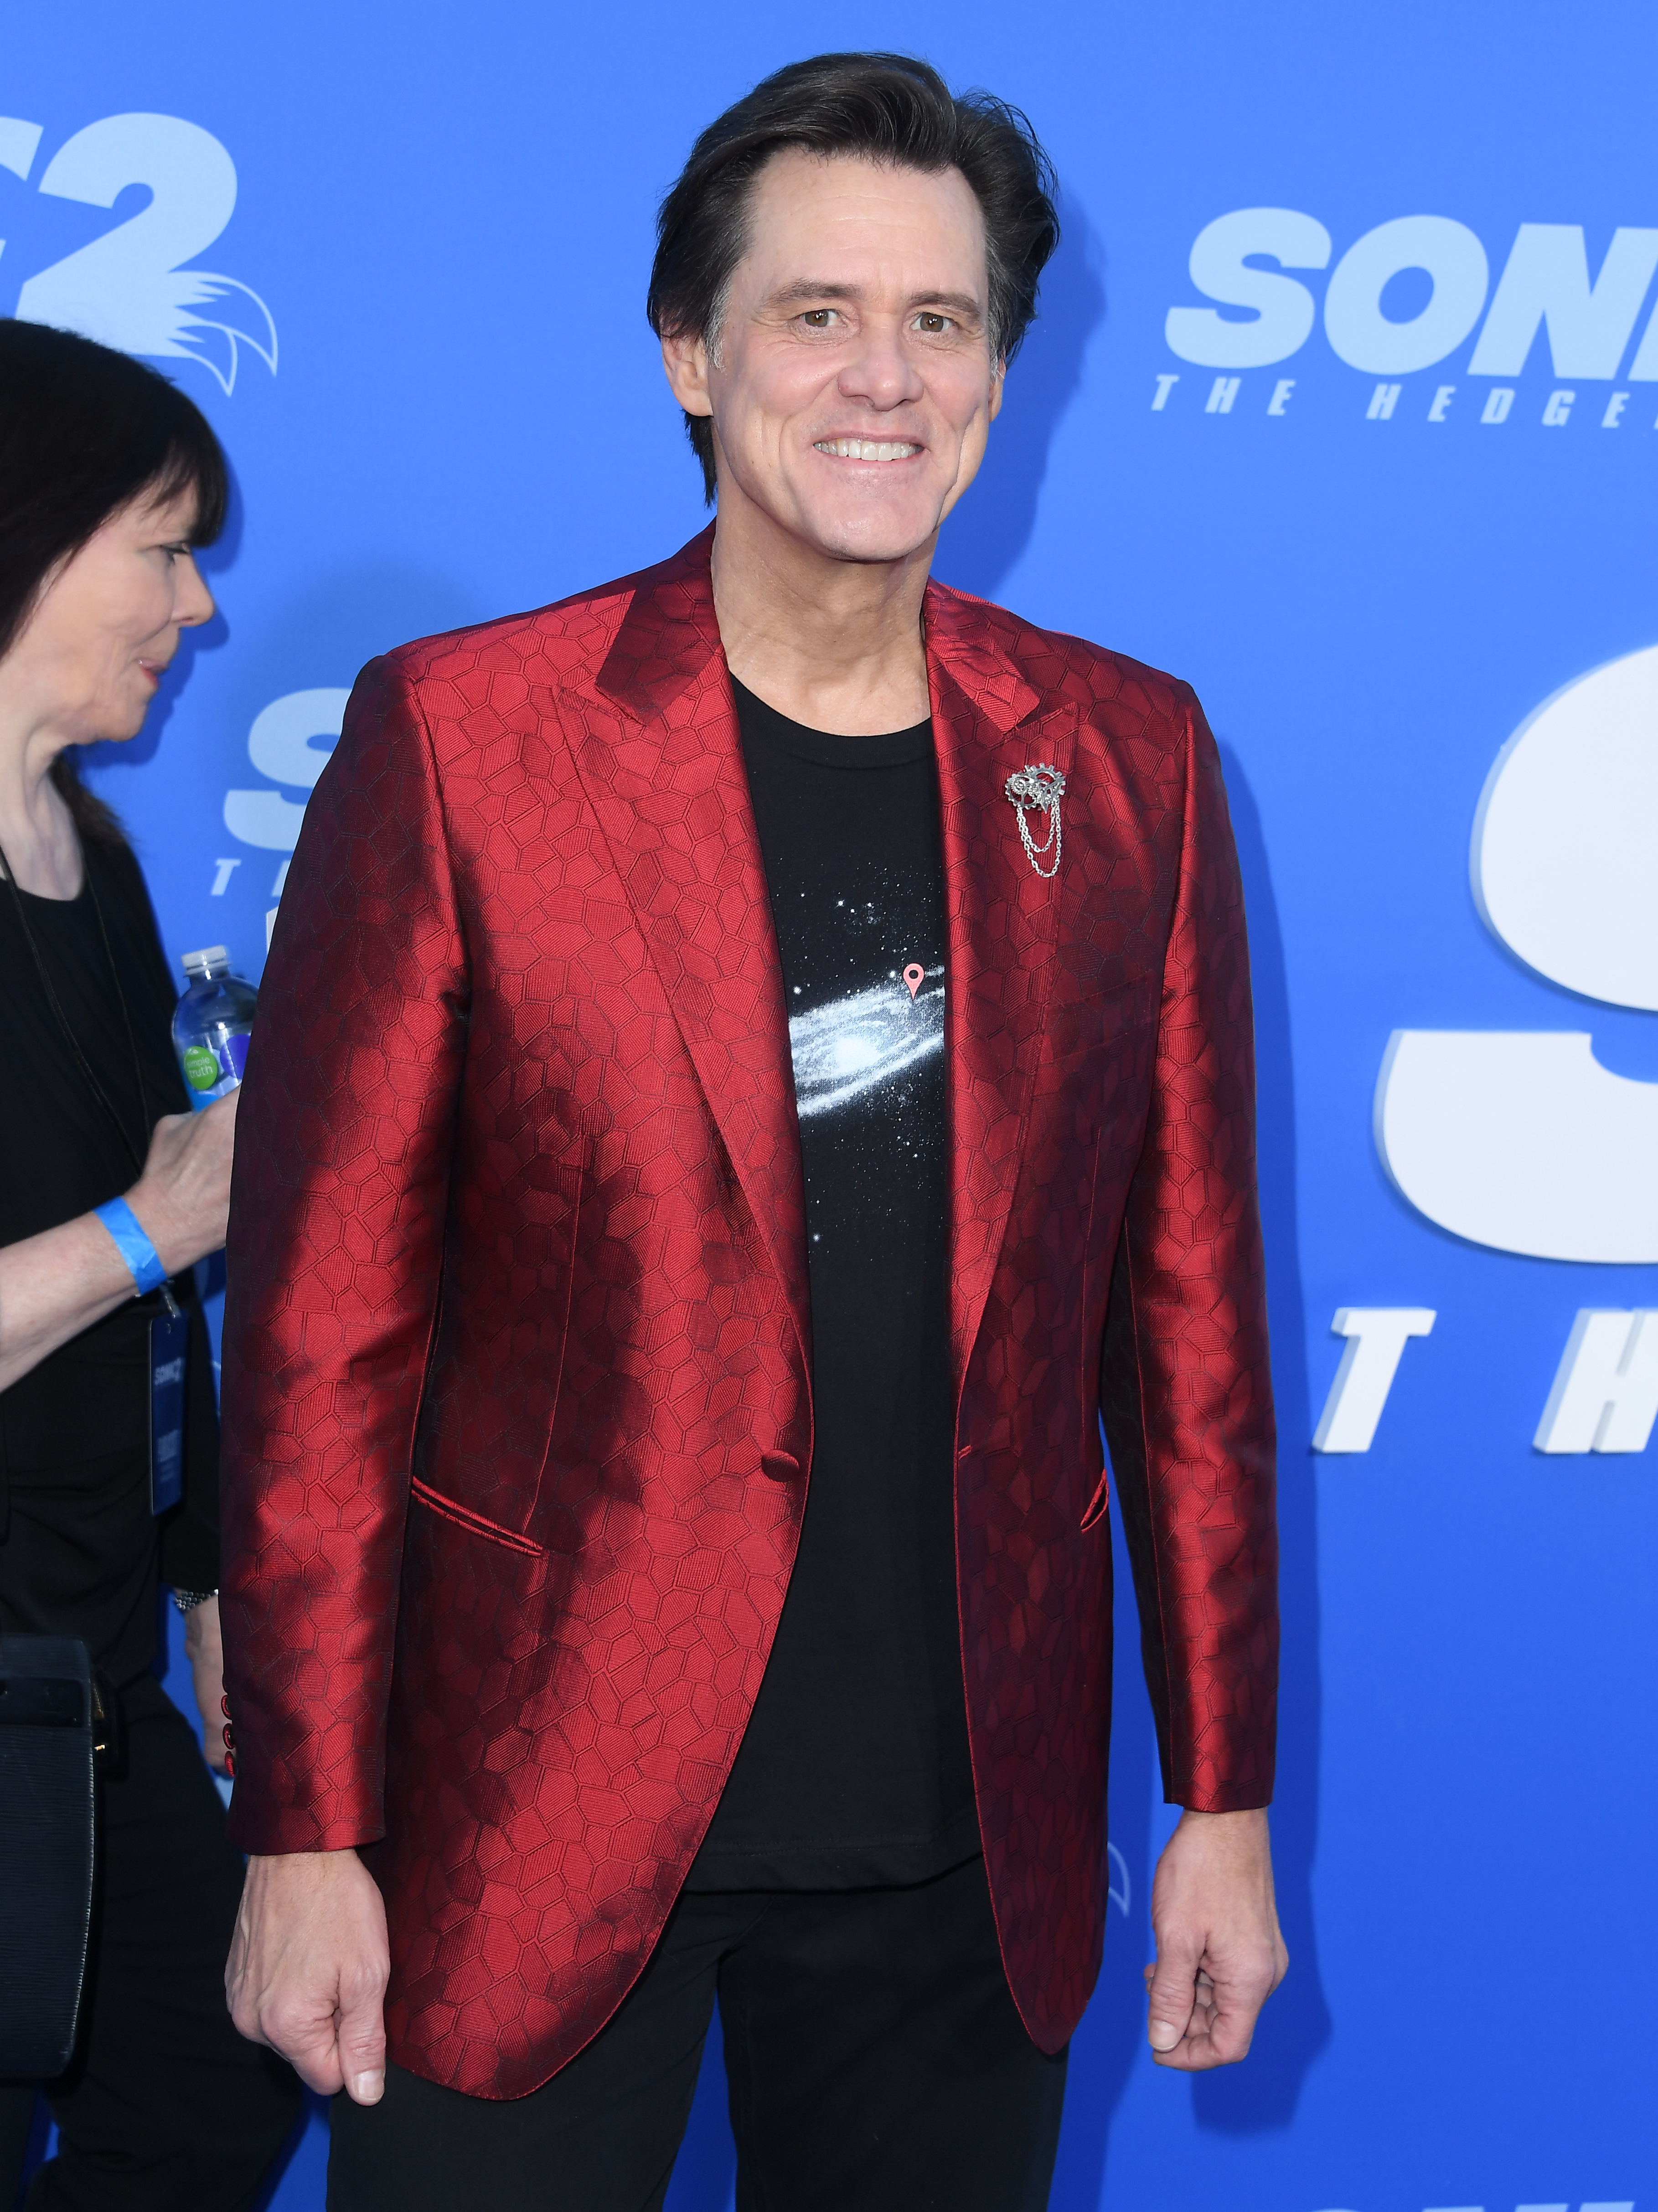 Close-up of Jim smiling in a shiny suit jacket at a media event